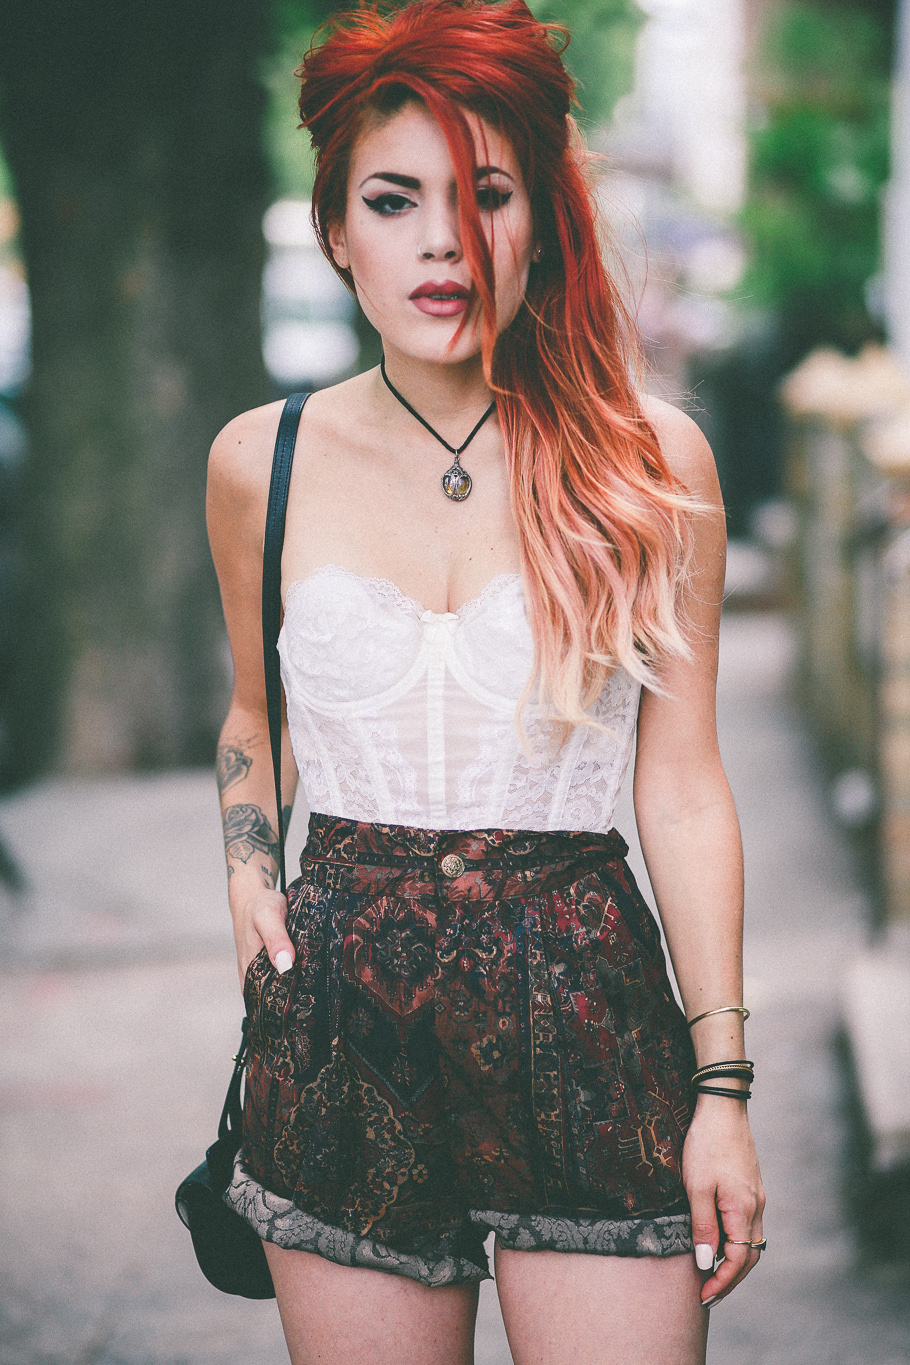 Le Happy wearing vintage lace bustier for a romantic dinner look